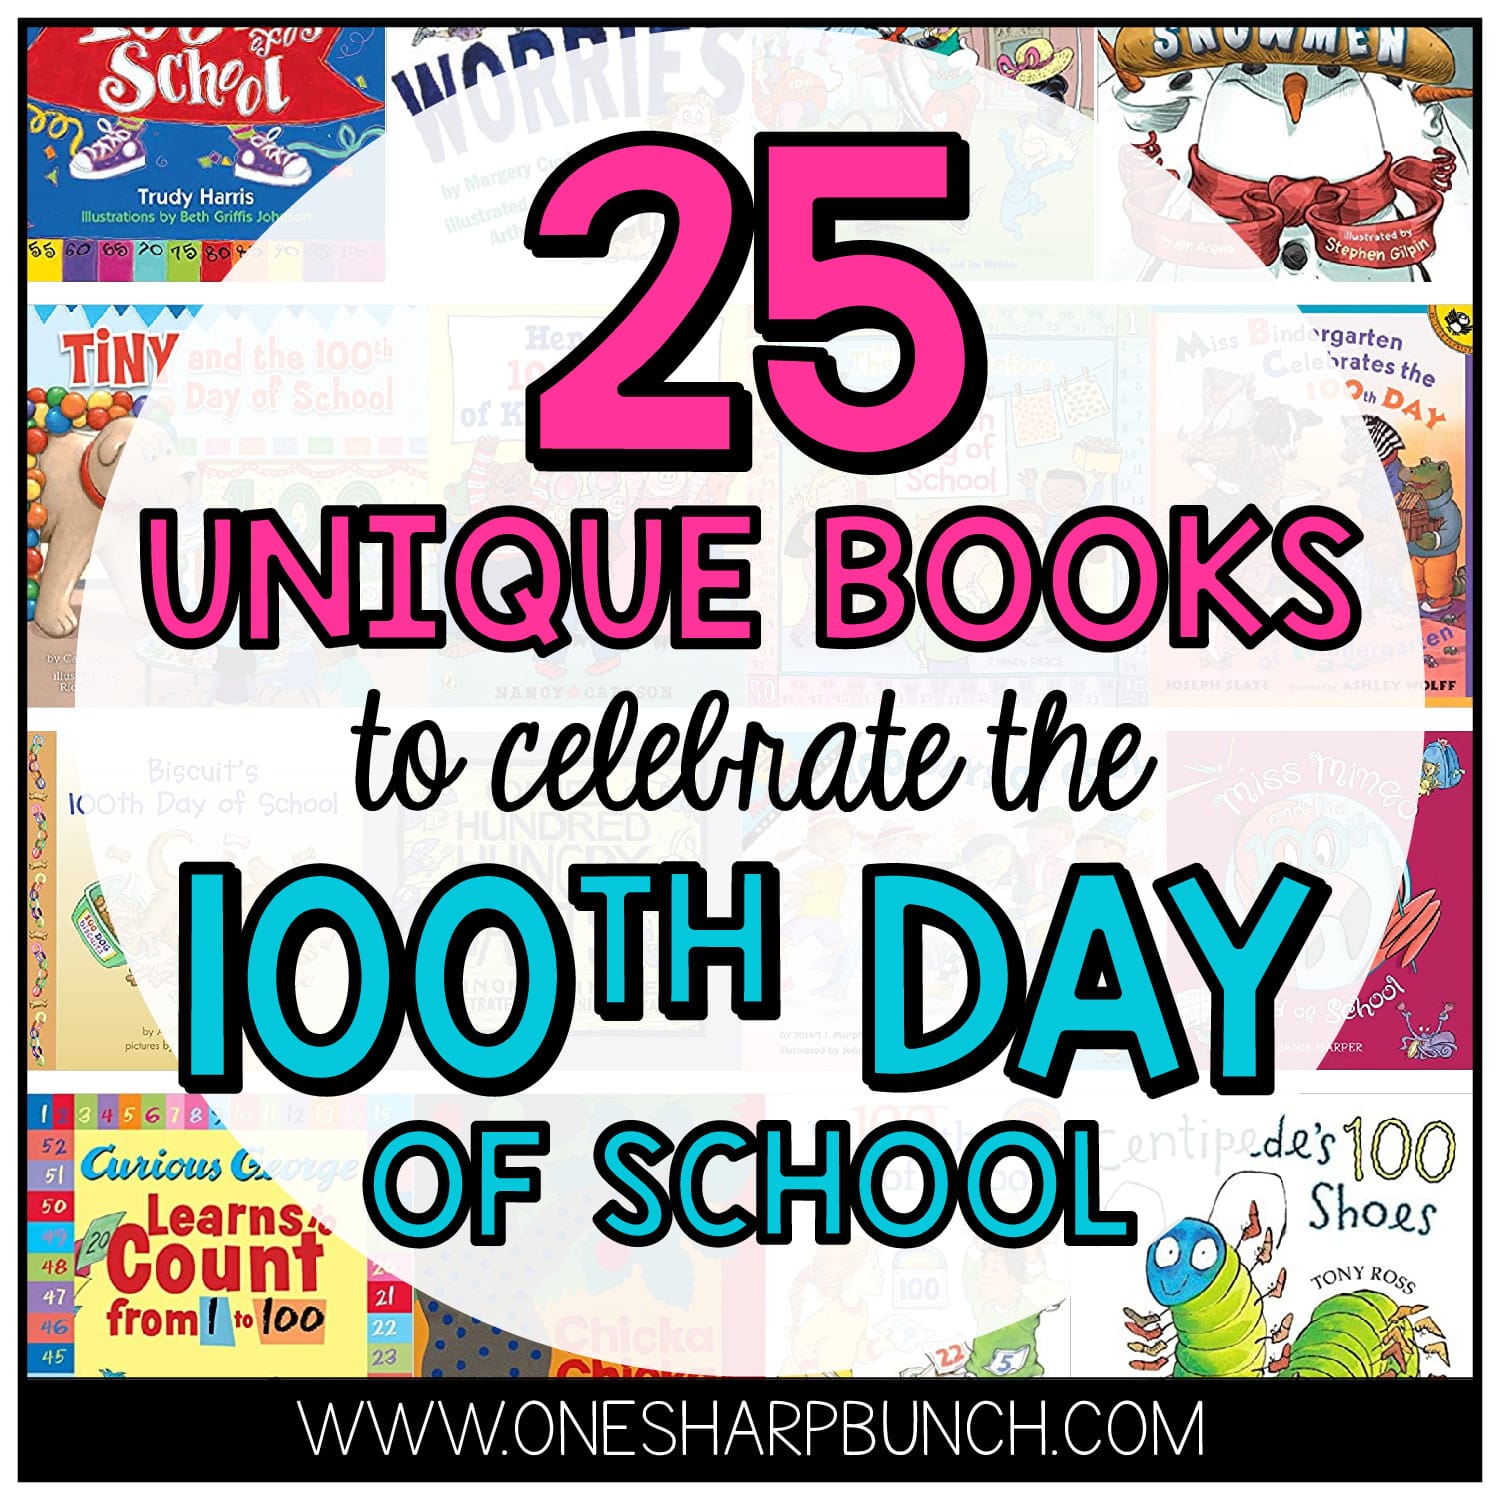 Celebrate the 100th Day of School with these 25 math, literacy, science and social studies 100th Day books! These picture books for the 100th Day of School pair well with your favorite 100th Day of School activities, 100th Day crafts, 100th Day of School necklaces and 100th Day collections in preschool, kindergarten or first grade!